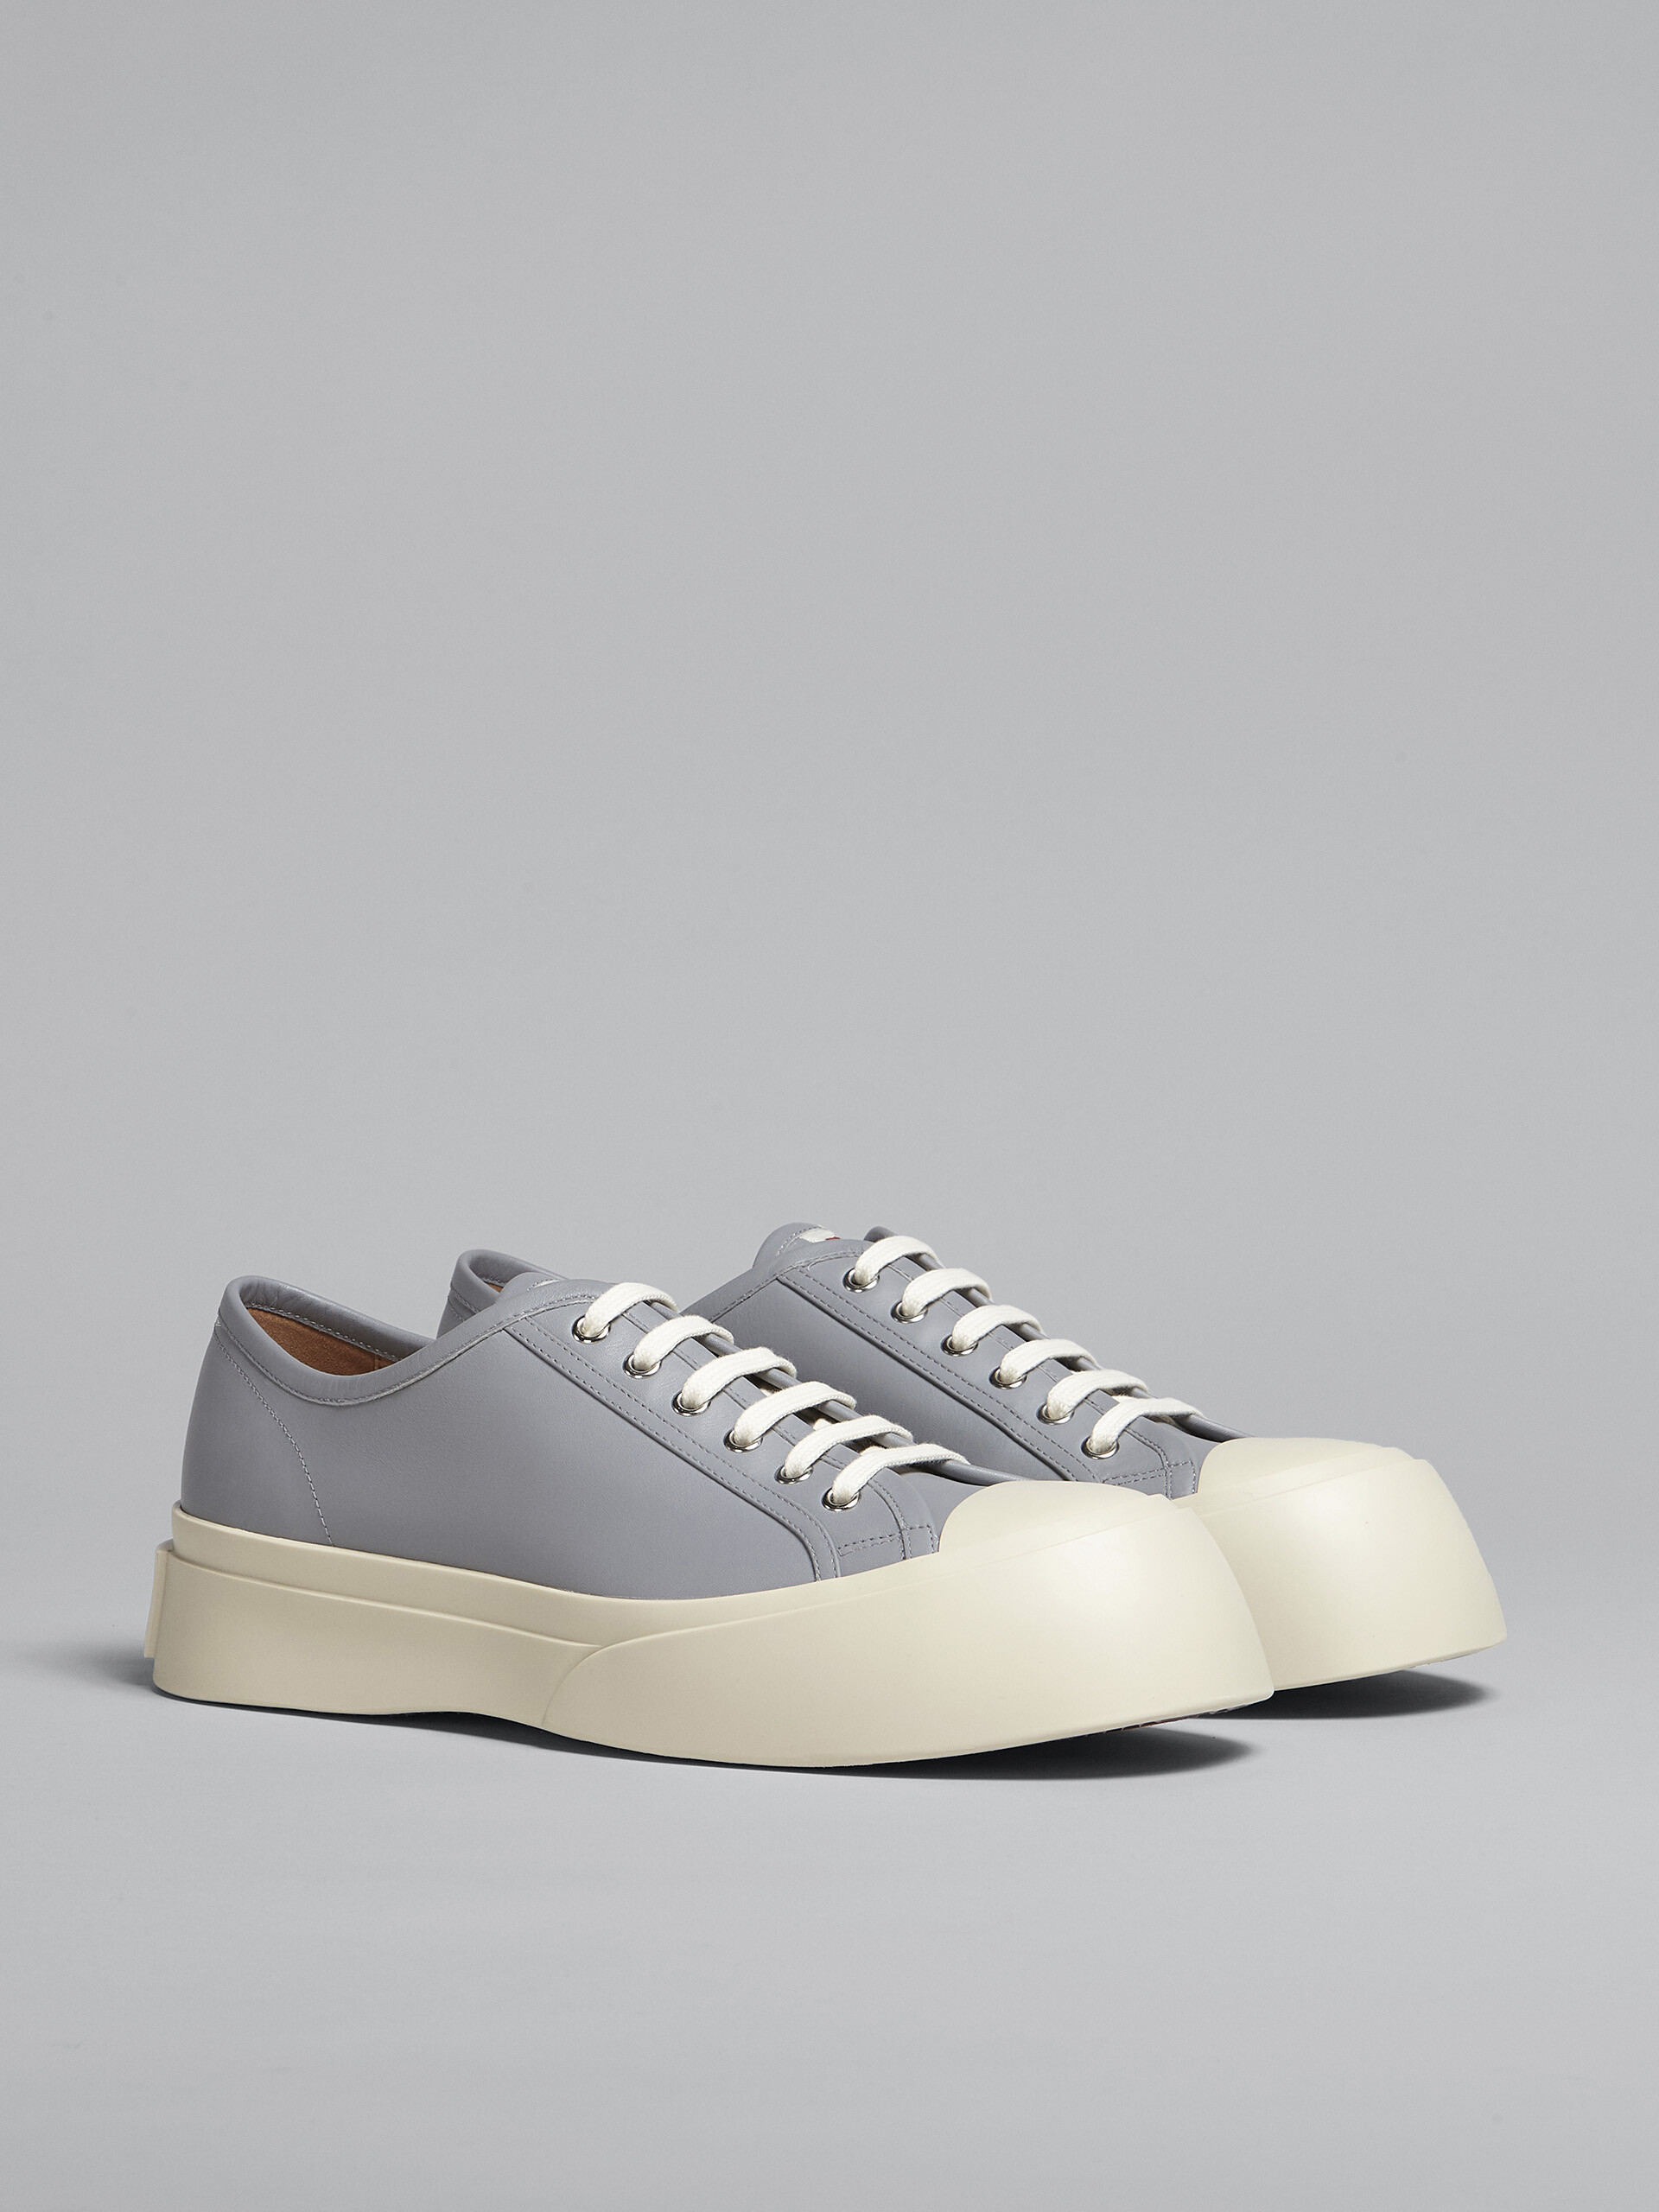 Grey nappa leather PABLO sneaker - Sneakers - Image 2